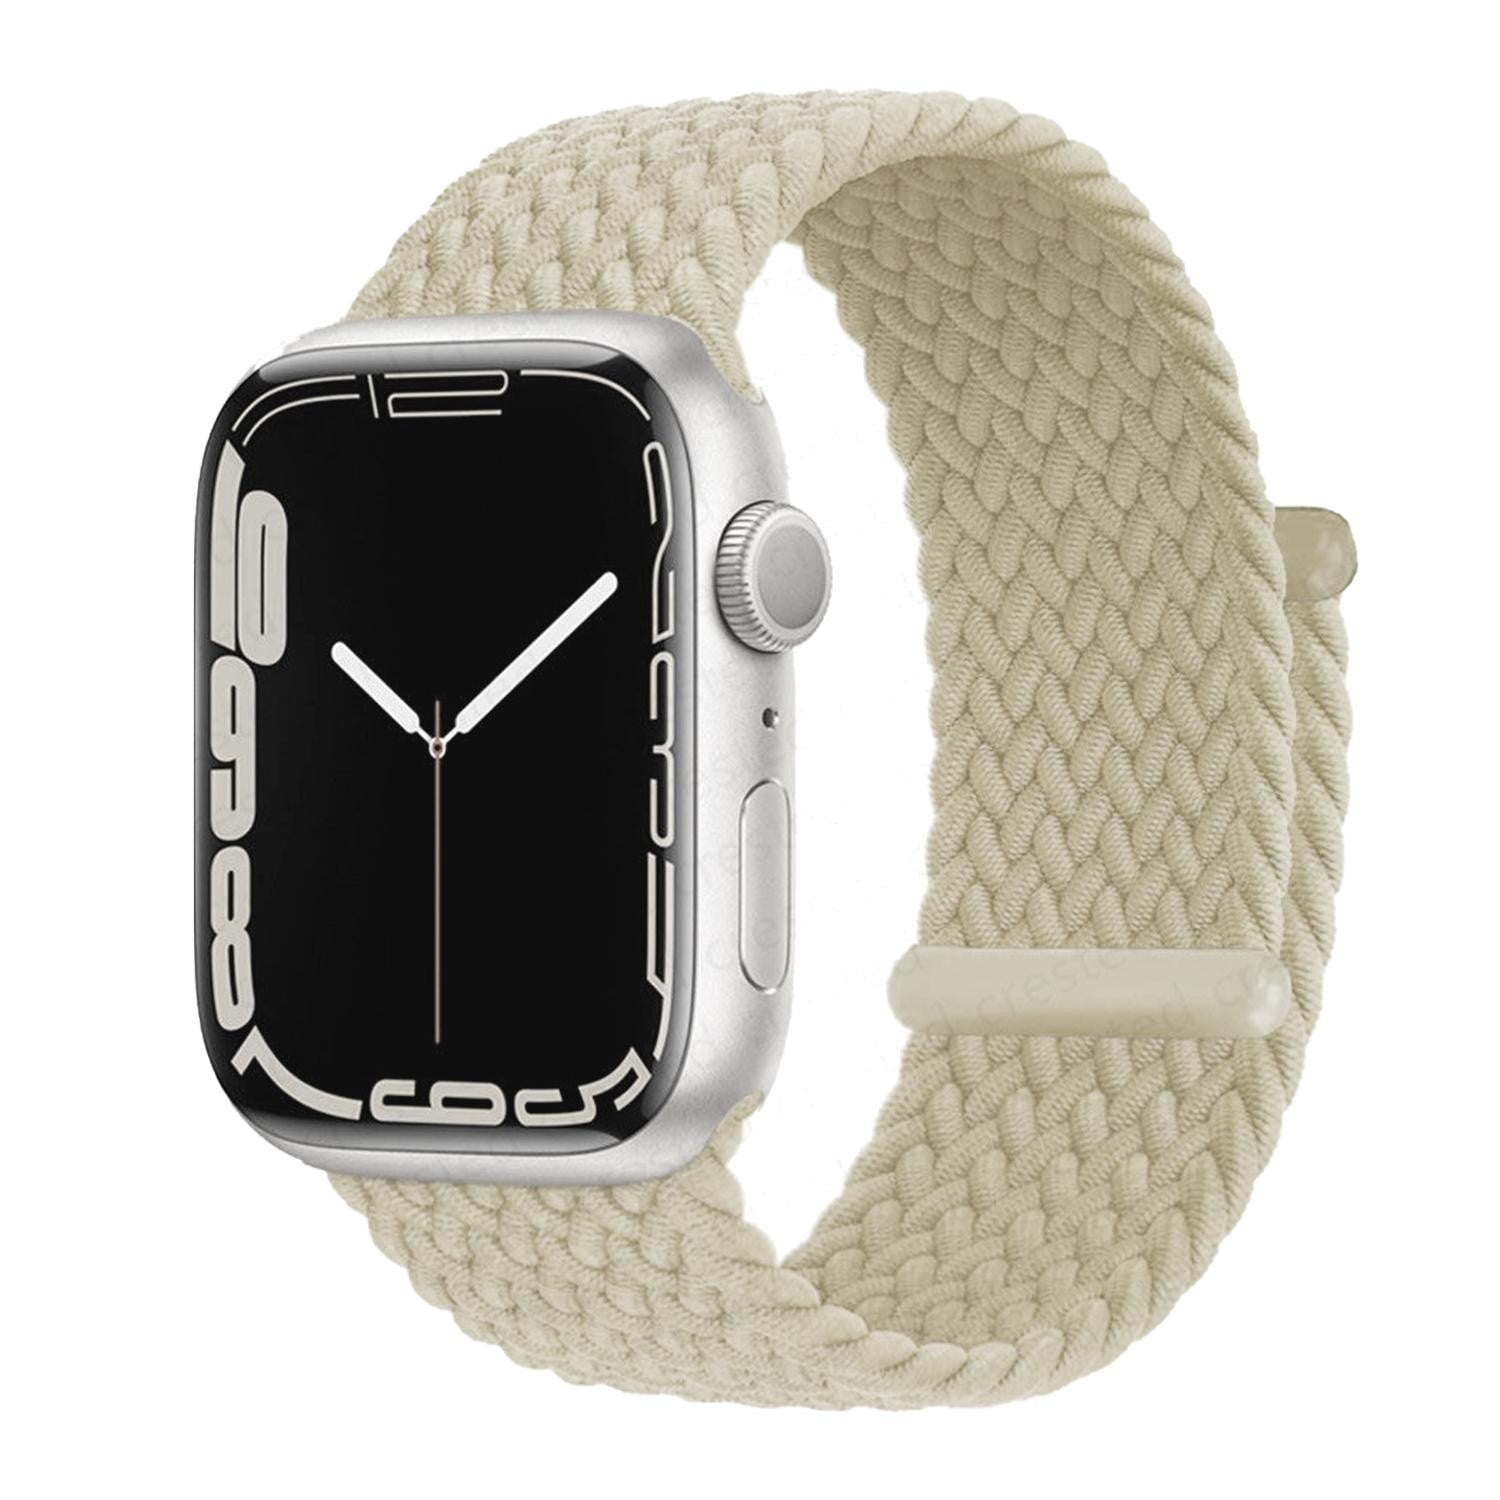 Yepband Ceramic Band Compatible with Apple Watch Bands 45mm 41mmm